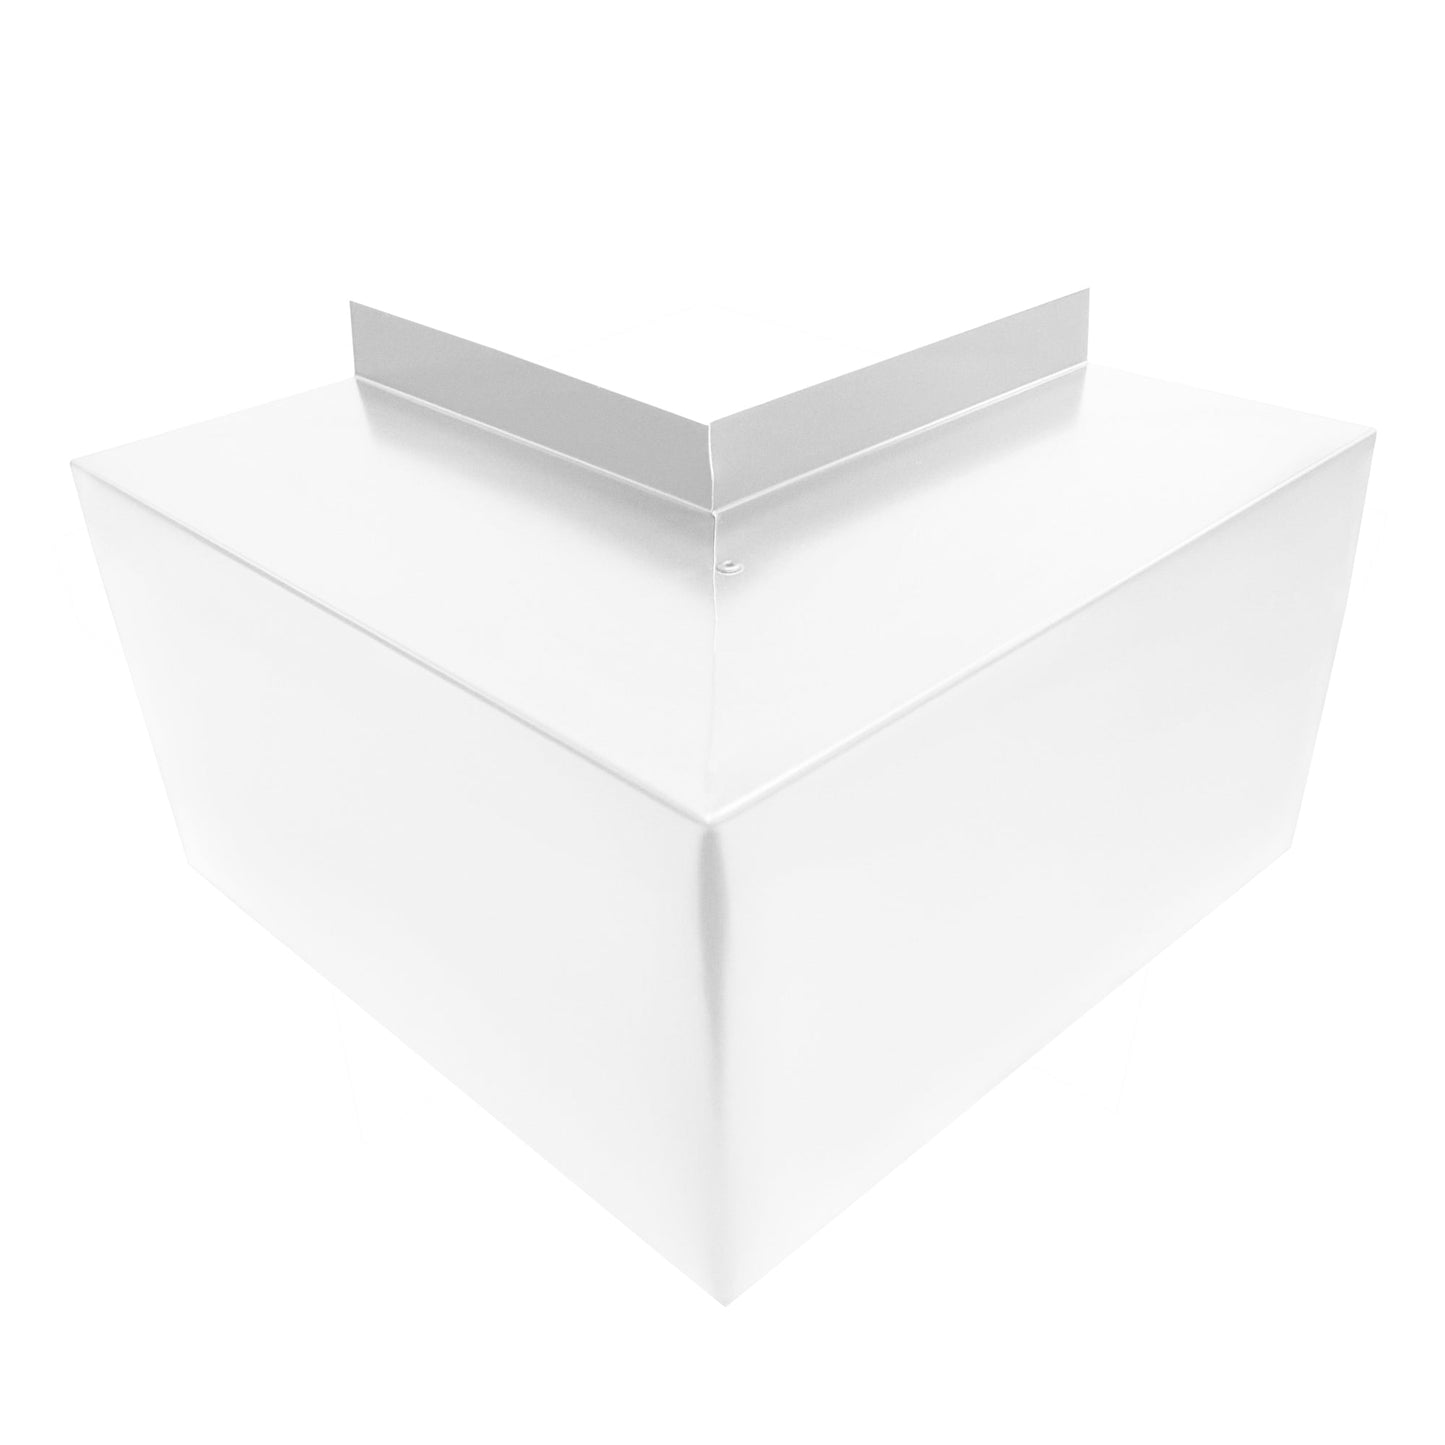 A sleek, white, angular object with a V-shaped ridge on top. It has crisp edges and a minimalistic design, suggesting it could be part of an HVAC line set cover or a piece of contemporary art. The overall finish appears smooth and glossy, hinting at premium quality construction and simple and easy installation — just like the Residential Series - Line Set Cover Outside Corner Elbows from Perma Cover.